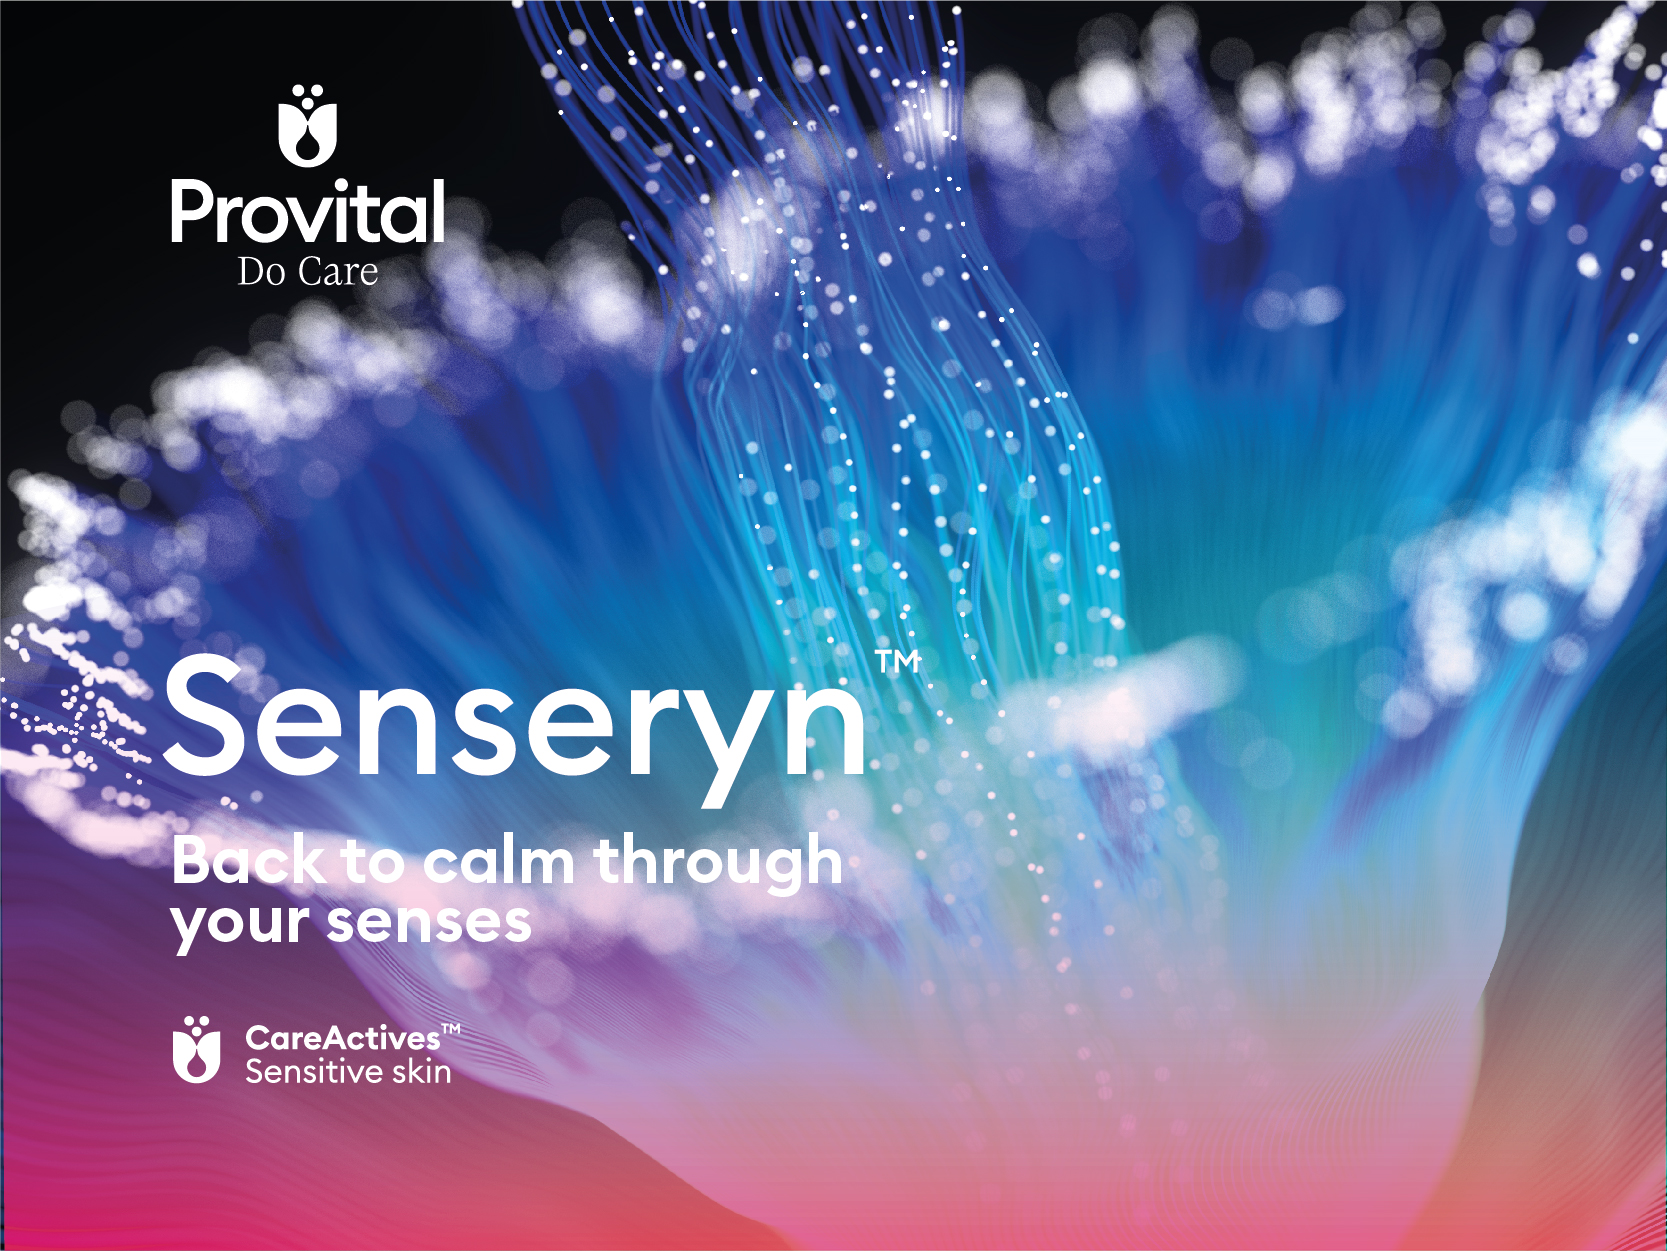 Senseryn: Skin and senses connected for well-being
